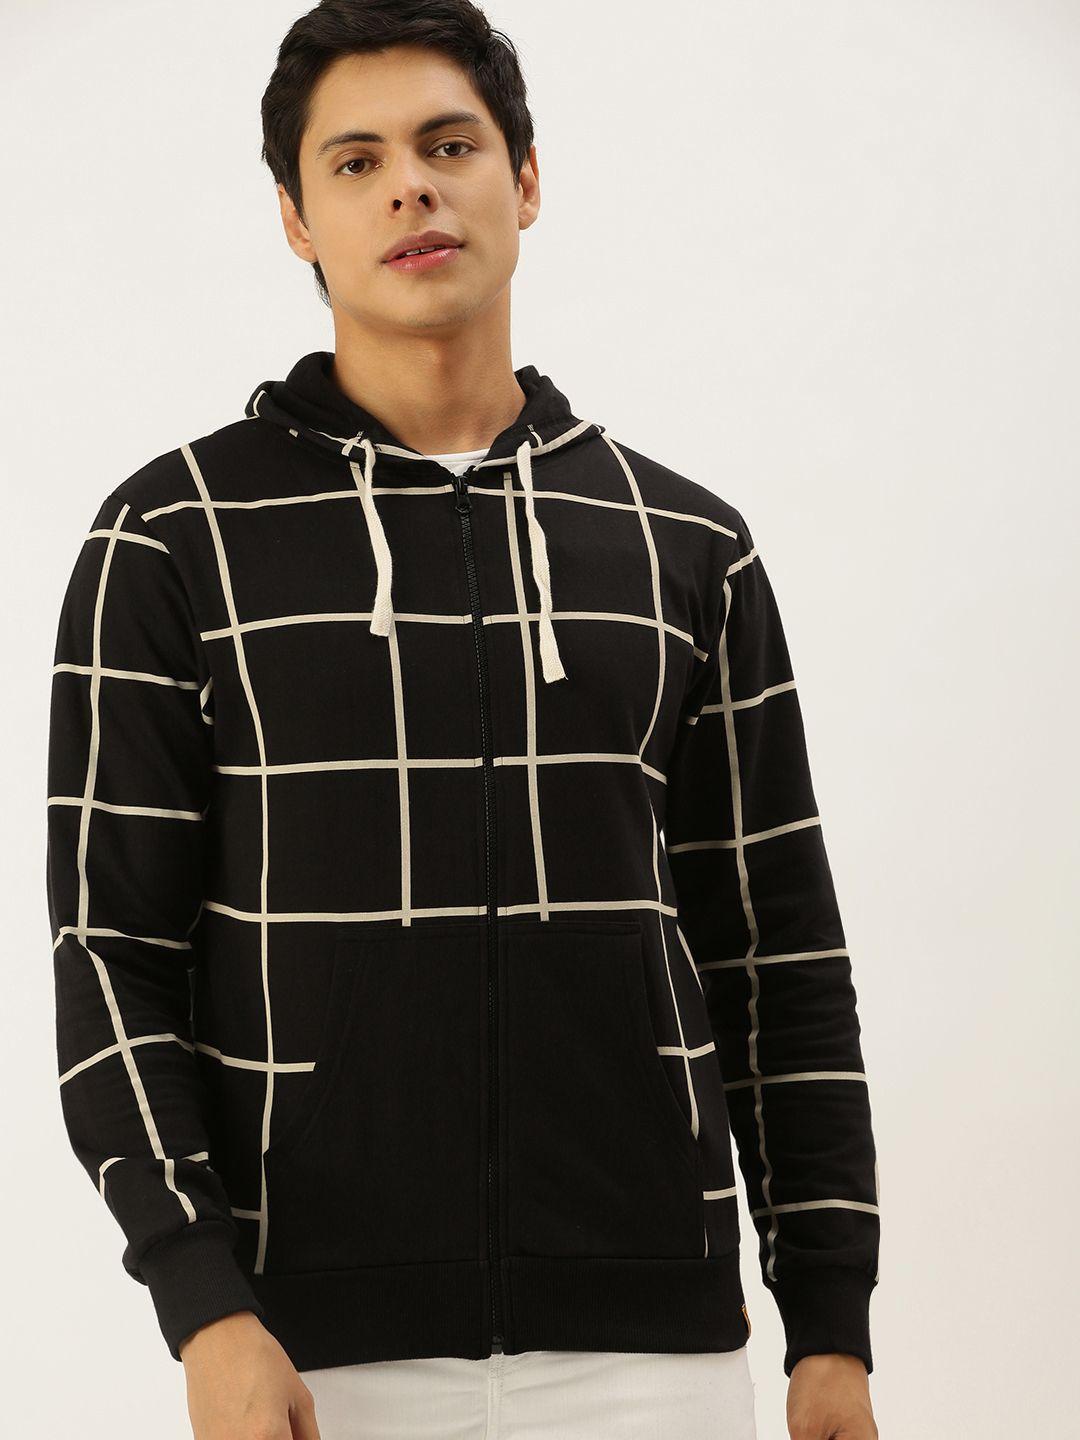 campus-sutra-men-black-&-off-white-checked-hooded-sweatshirt